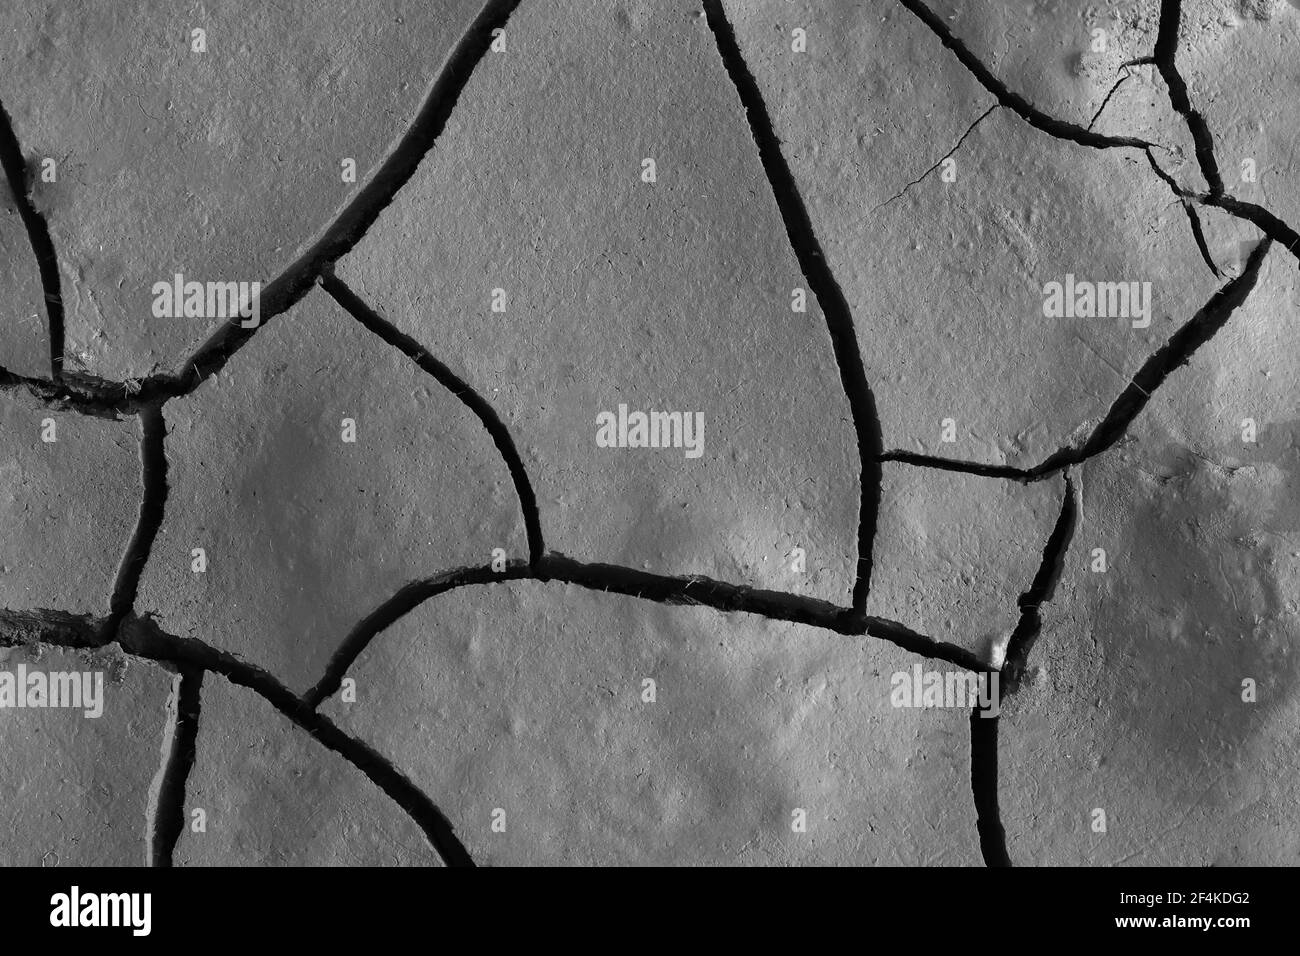 Dried gray cracked clay soil or mud soil texture background. Stock Photo